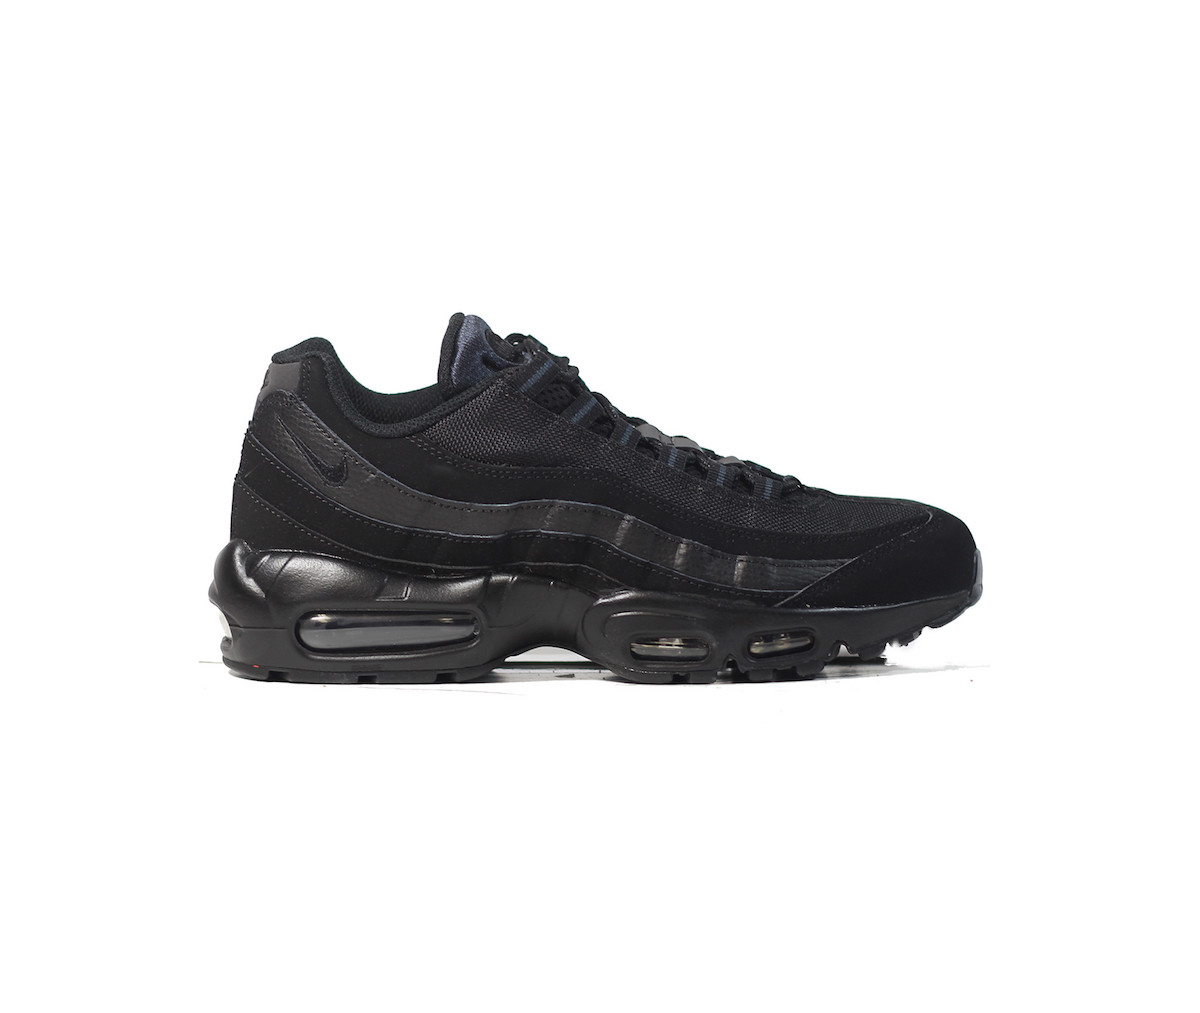 Finally, the Blacked Out Nike Air Max 95 That Everyone Wants for Work ...